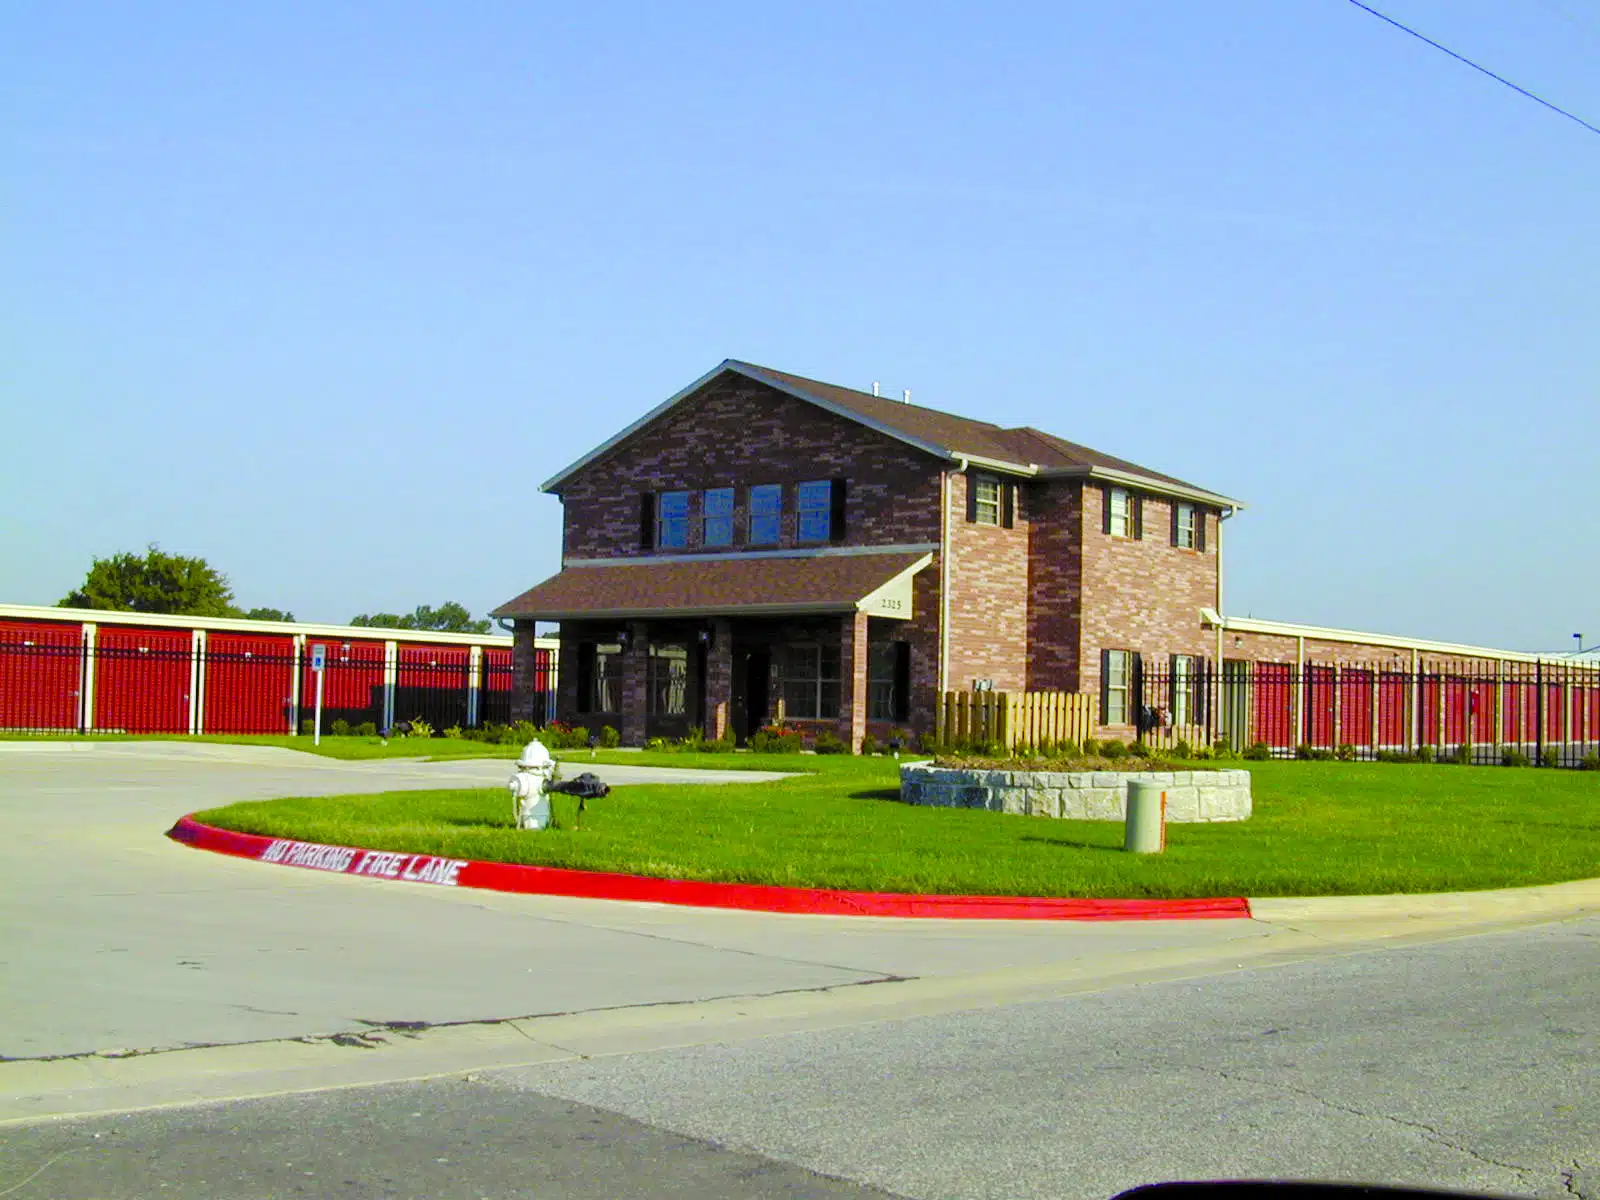 Self Storage Buildings with Red Doors and Storefront